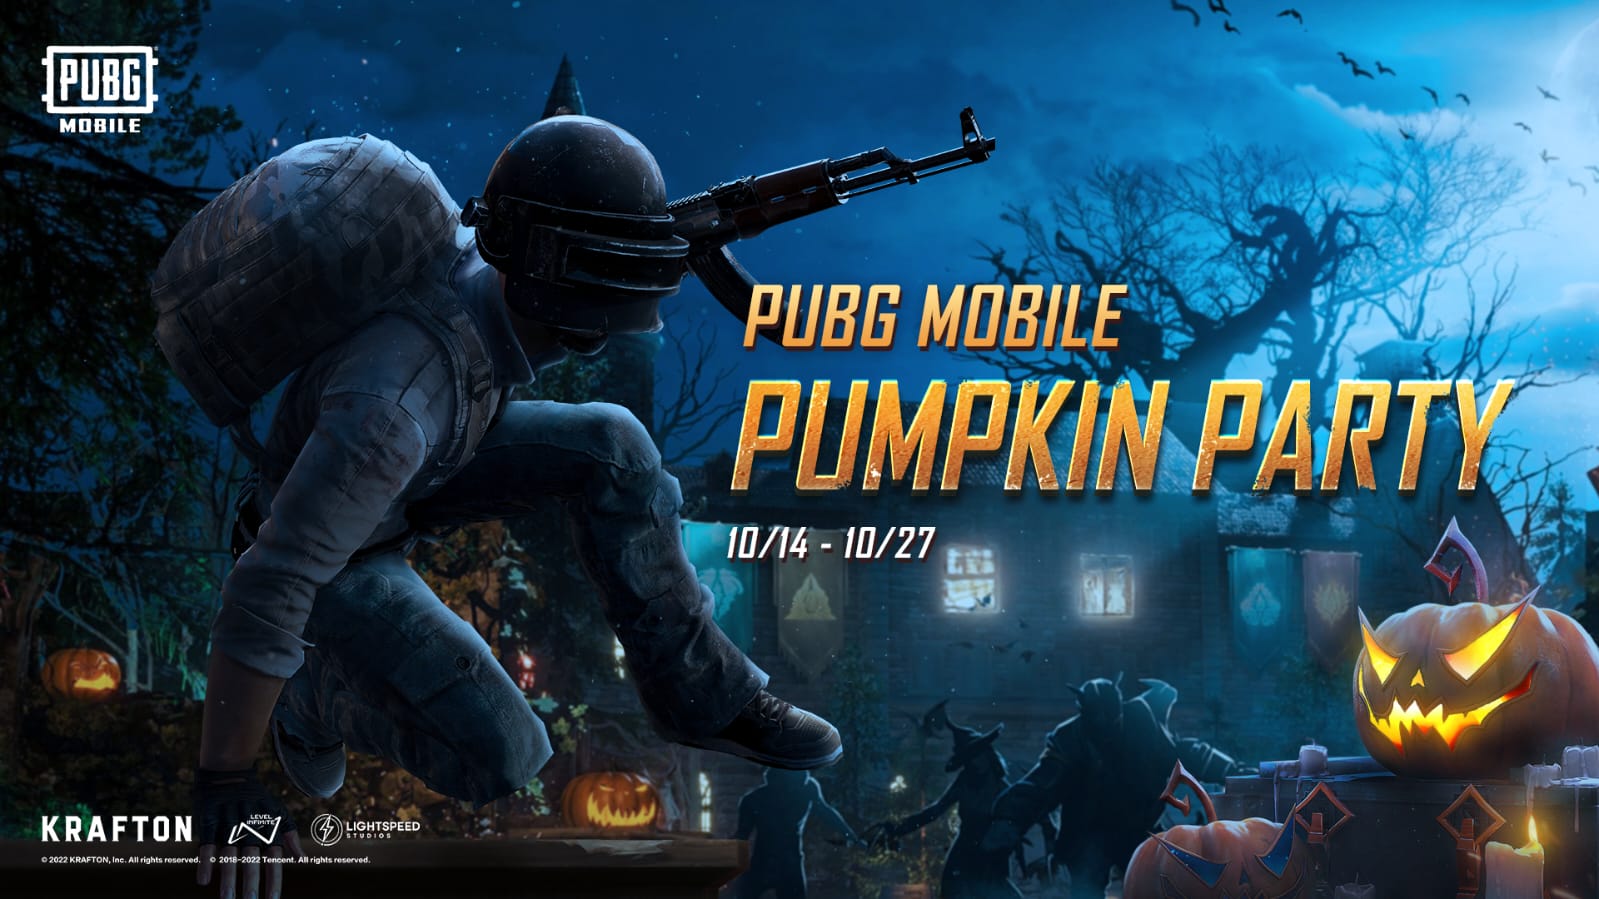 PUBG Mobile Pumpkin Party Event: Share your real-life pumpkin-themed decorations to win some UC